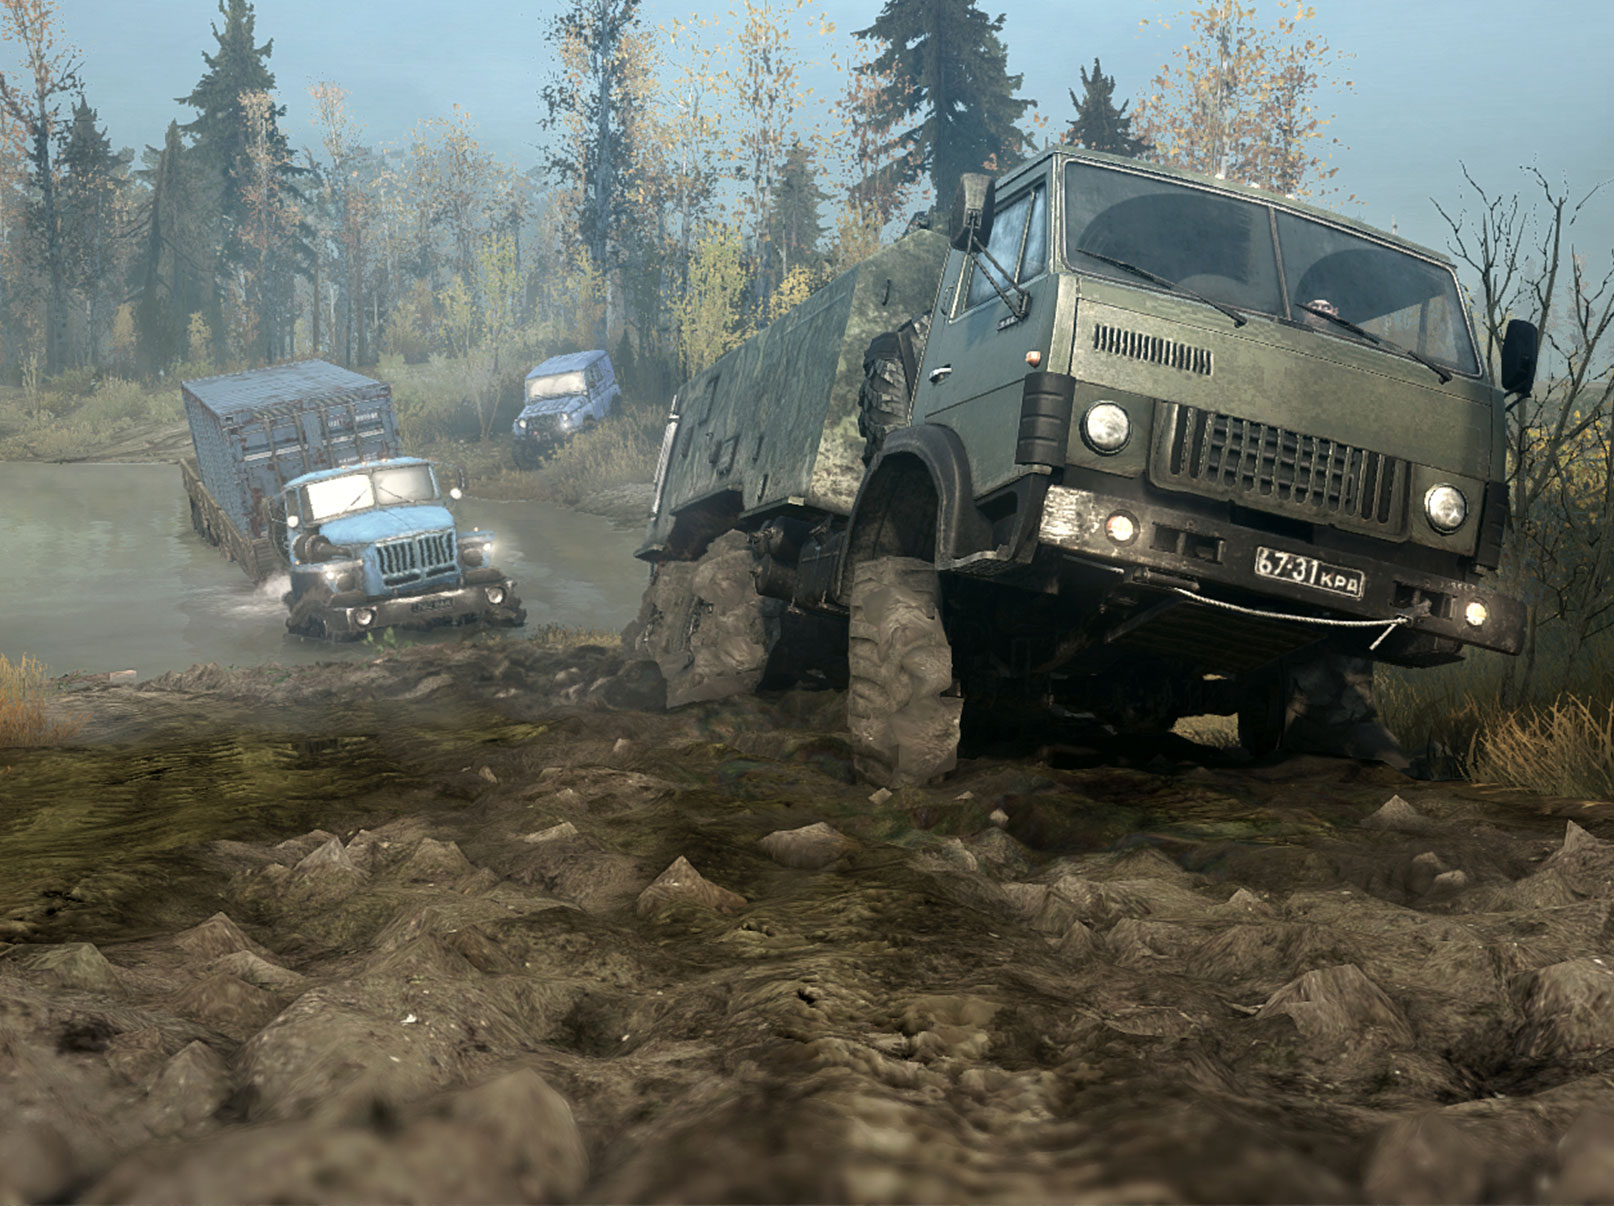 Mad runner expedition. Spin Tires MUDRUNNER ps4. MUDRUNNER Xbox 360. Игра SPINTIRES MUDRUNNER 2. Spin Tires MUDRUNNER Xbox 360.